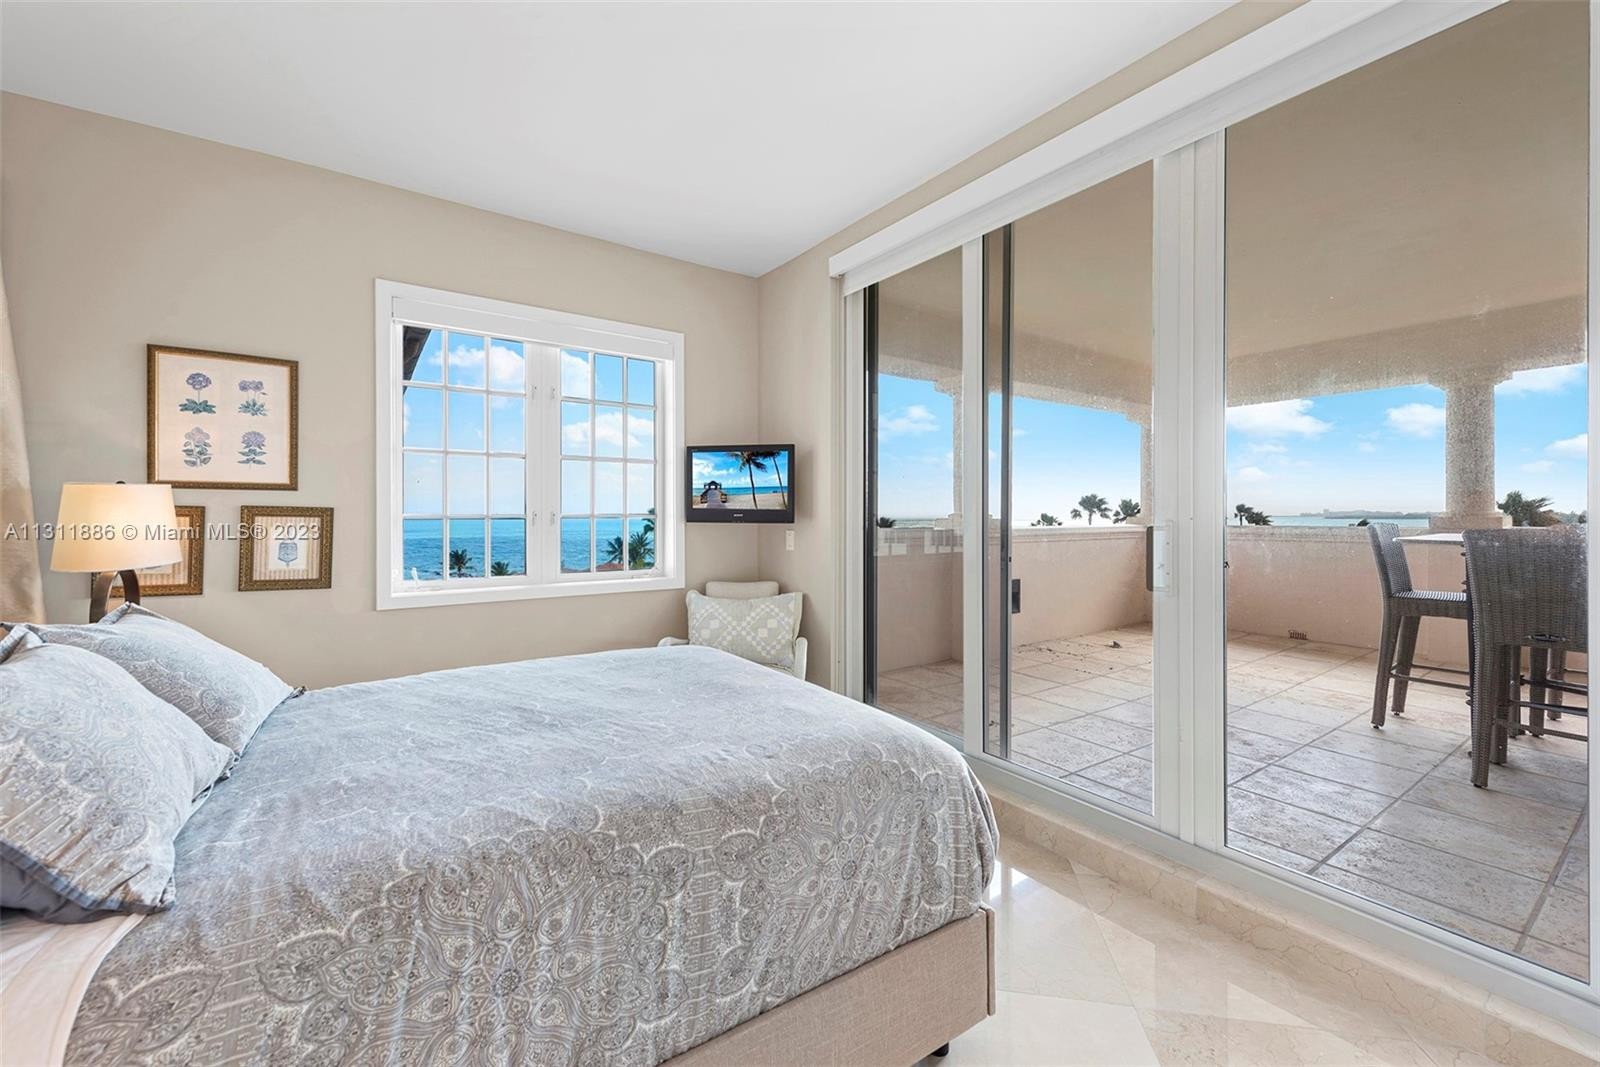 25. 19253 Fisher Island Dr